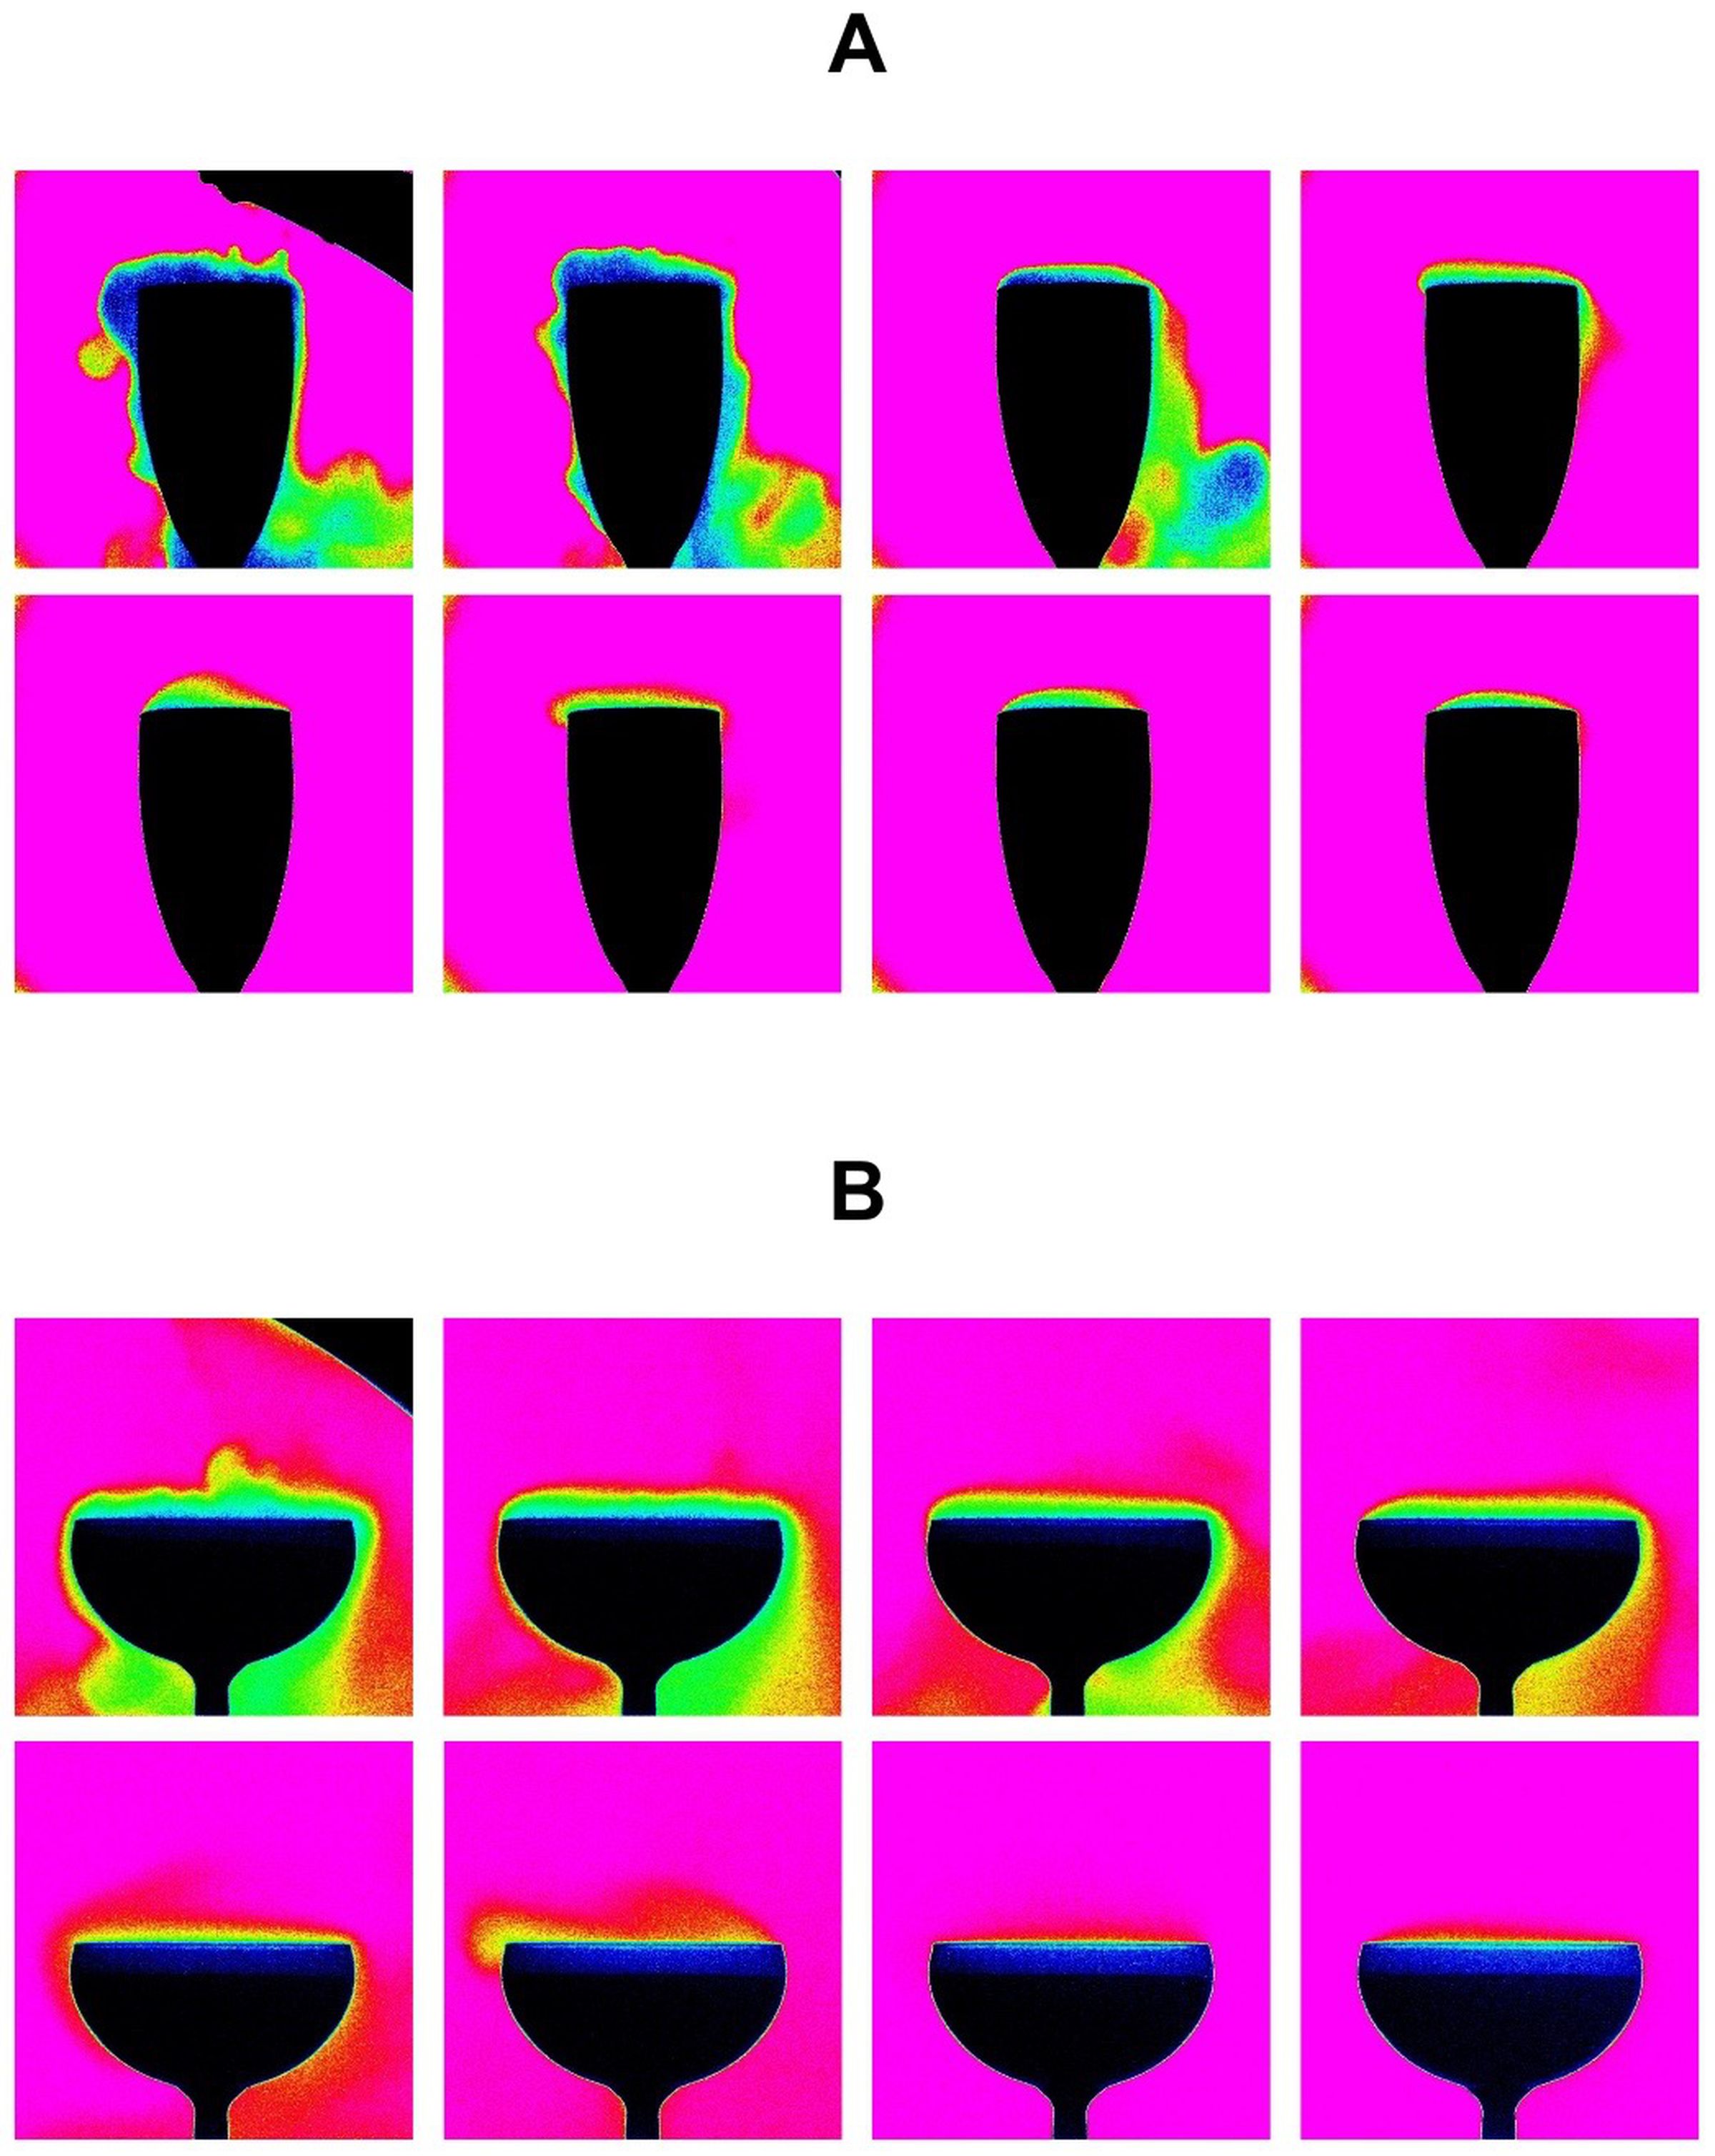 Carbon dioxide escapes from a champagne flute (A) and a champagne coupe (B) in this false colored, infrared image.